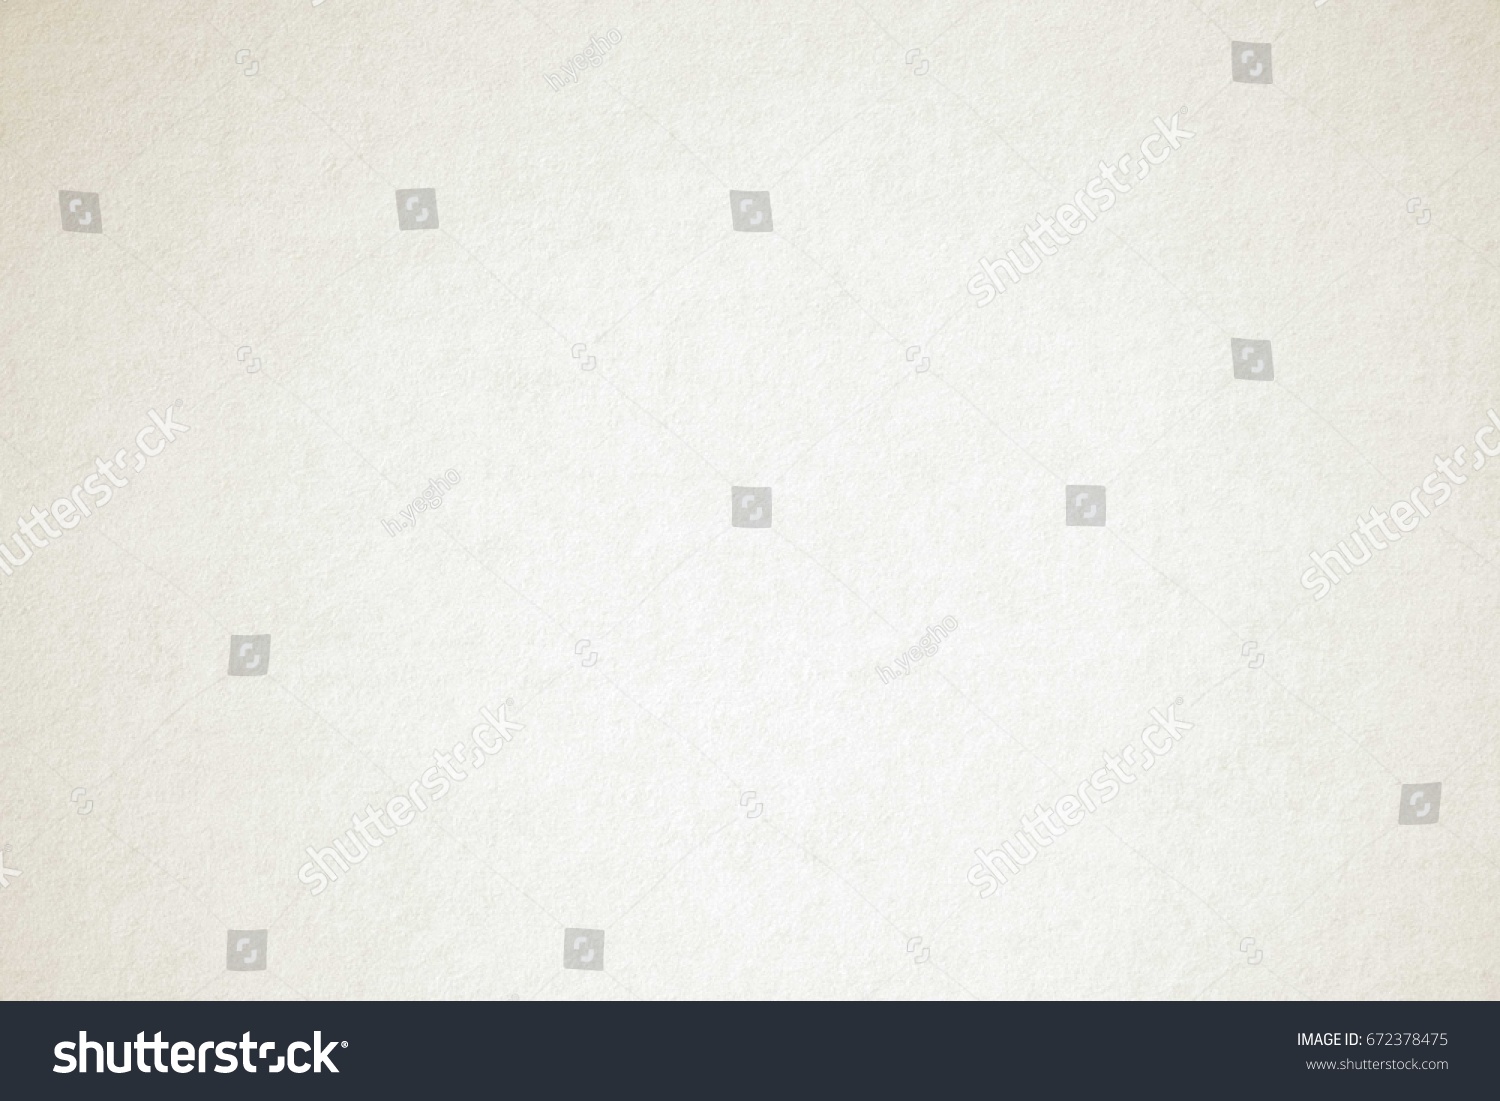 ivory white paper texture #672378475